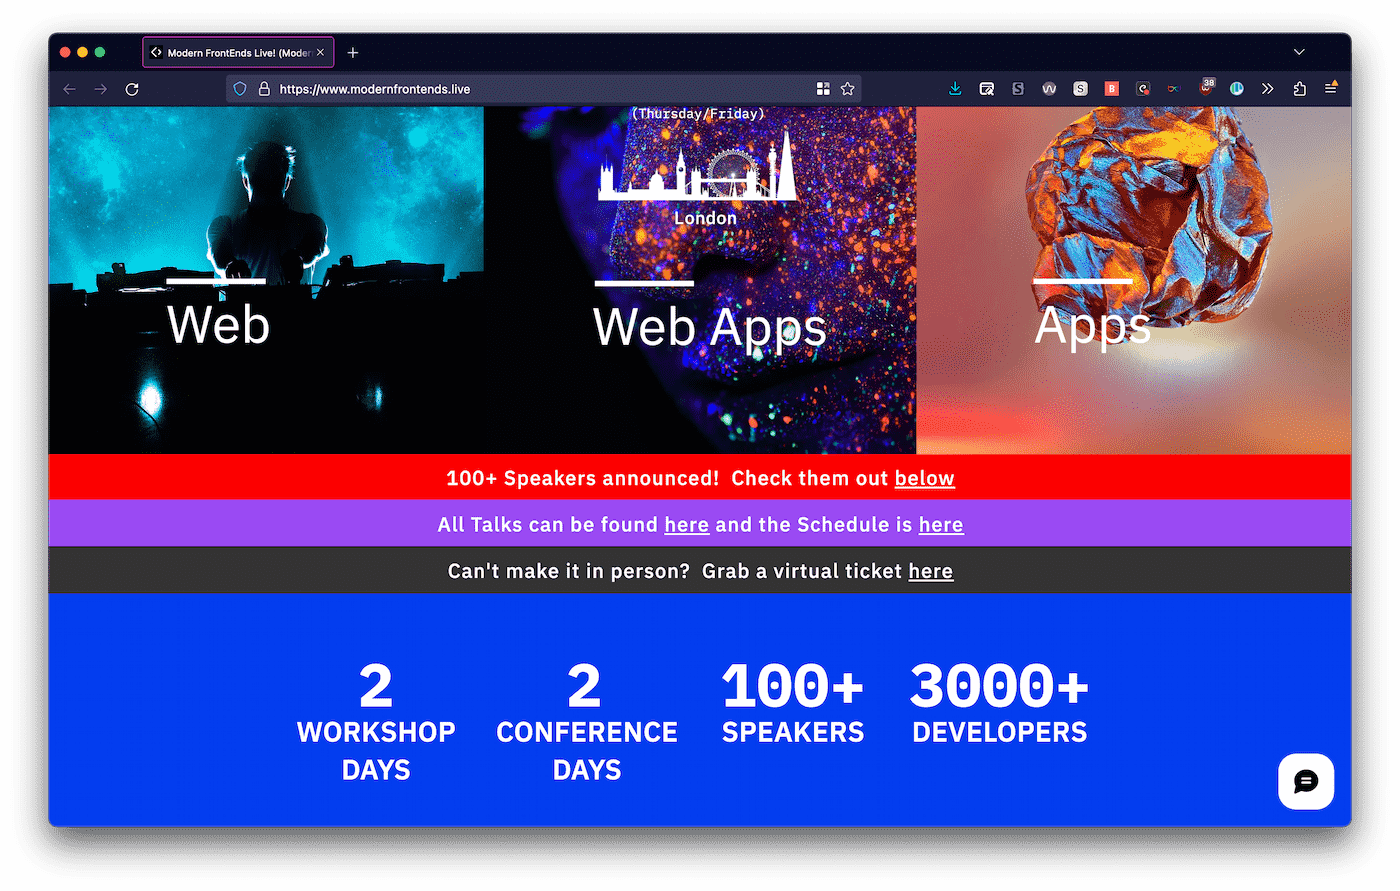 screenshot of modernfrontends.live, displaying 100+ speakers announced, 2 workshop days, 2 conference days, 100+ speakers, 3000+ developers